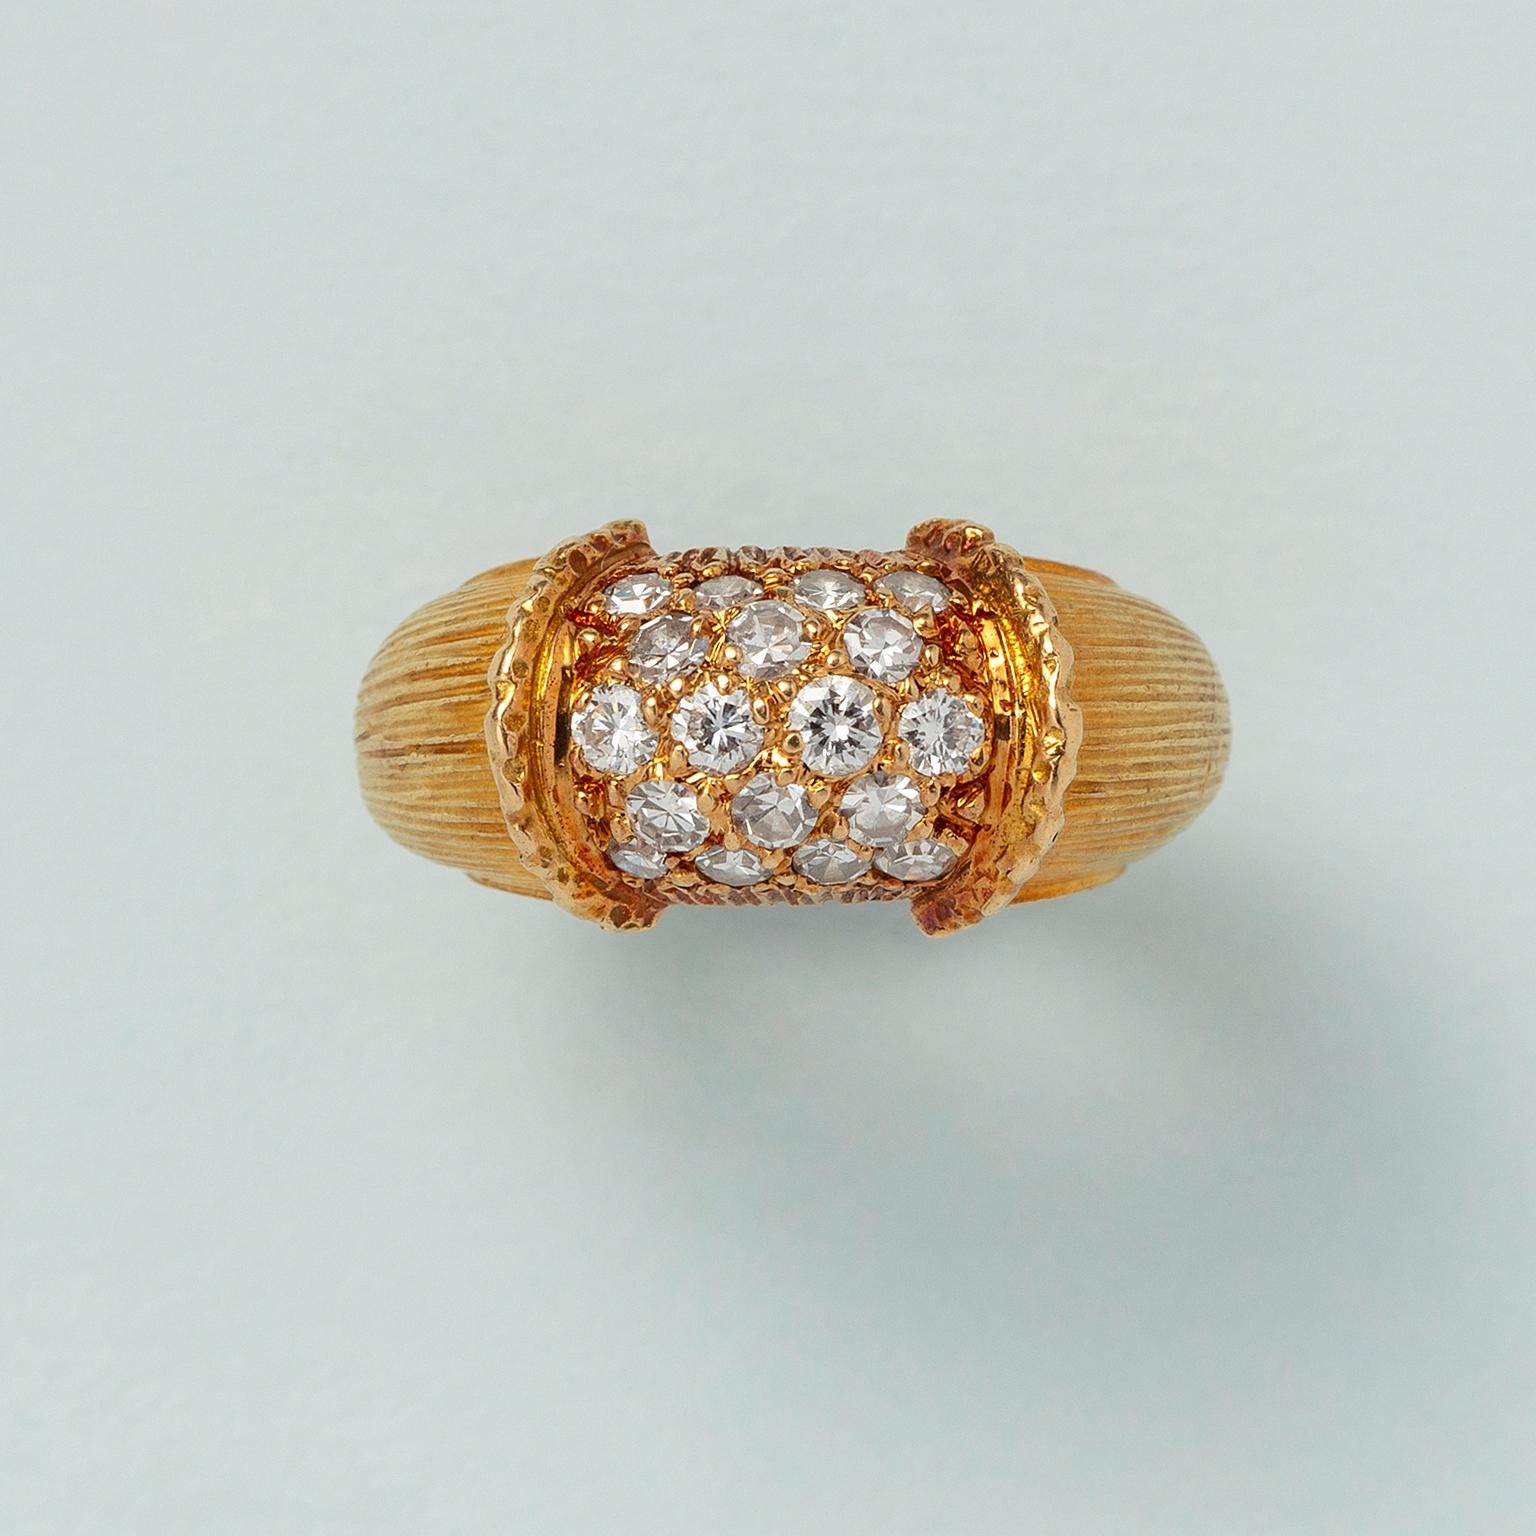 A small 18 carat yellow gold band ring the middle part is set with 18 brilliant cut diamonds (0.72 ct) in honeycomb rows of three and four with  on each side an upright textured border and the shank is decorated with an engraved structure of fine